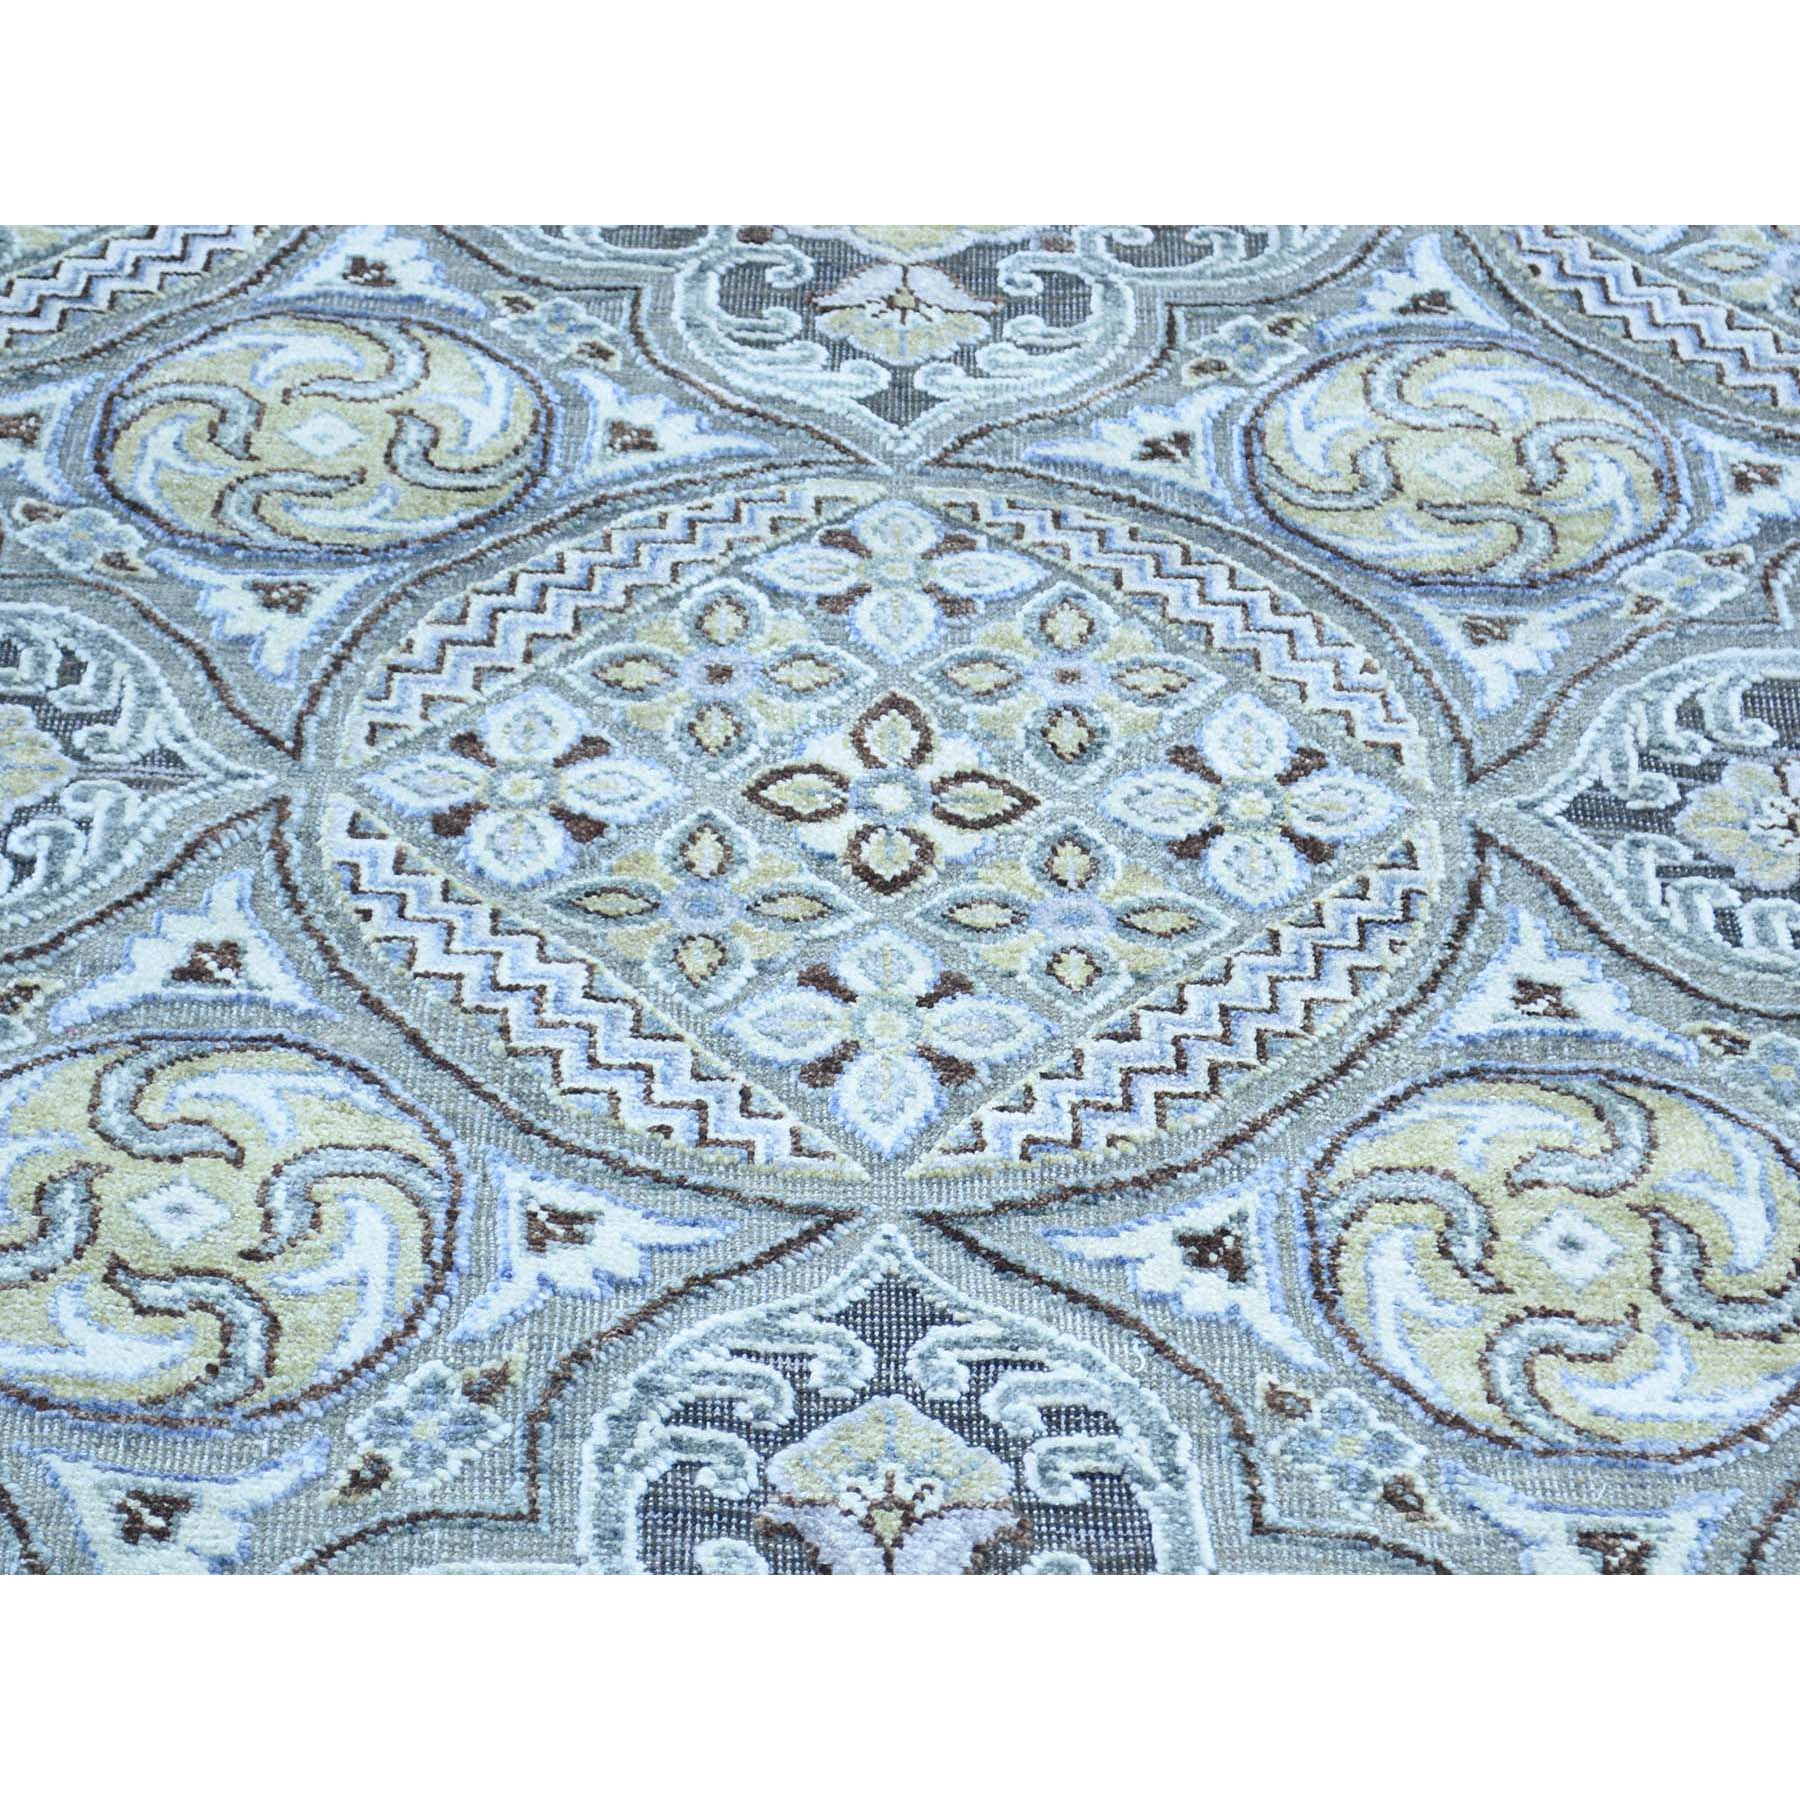 10-1 x14-4  Mughal Inspired Medallions Textured Wool and Silk Hand-Knotted Oriental Rug 